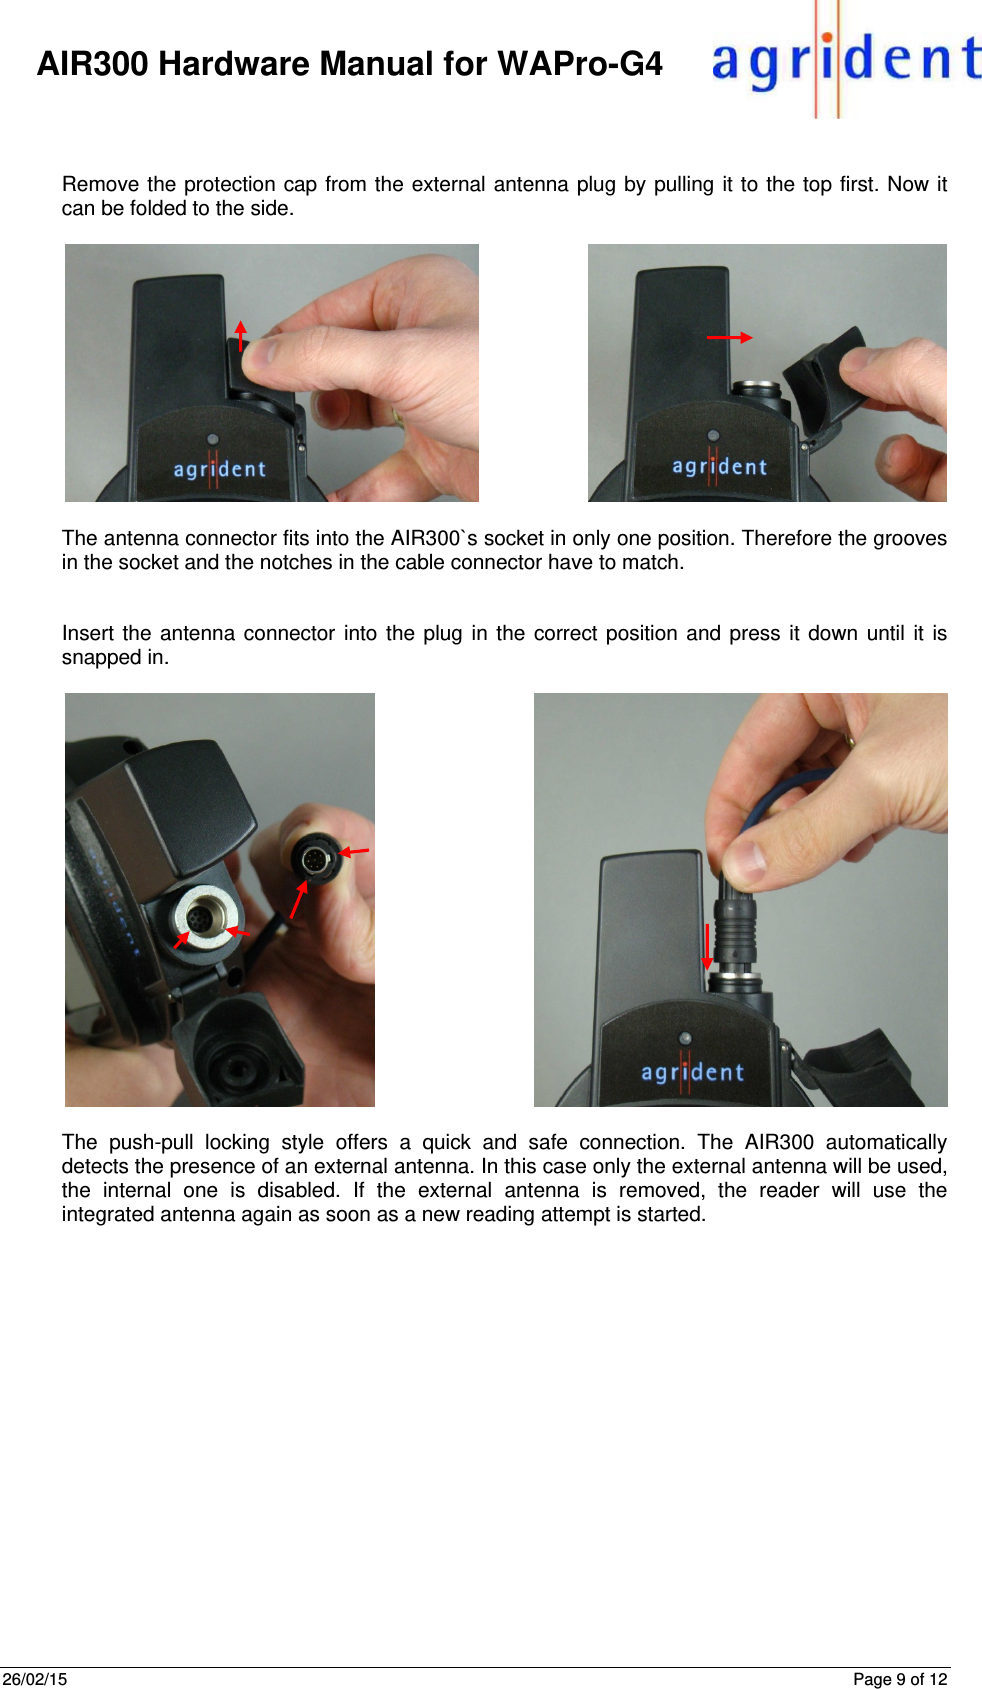 26/02/15      Page 9 of 12     AIR300 Hardware Manual for WAPro-G4   Remove the protection cap from the external antenna plug by pulling it to the top first. Now it can be folded to the side.   The antenna connector fits into the AIR300`s socket in only one position. Therefore the grooves in the socket and the notches in the cable connector have to match.    Insert the antenna connector into the plug in the correct position and press it down until it is snapped in.   The push-pull locking style offers a quick and safe connection. The AIR300 automatically detects the presence of an external antenna. In this case only the external antenna will be used, the internal one is disabled. If the external antenna is removed, the reader will use the integrated antenna again as soon as a new reading attempt is started.    